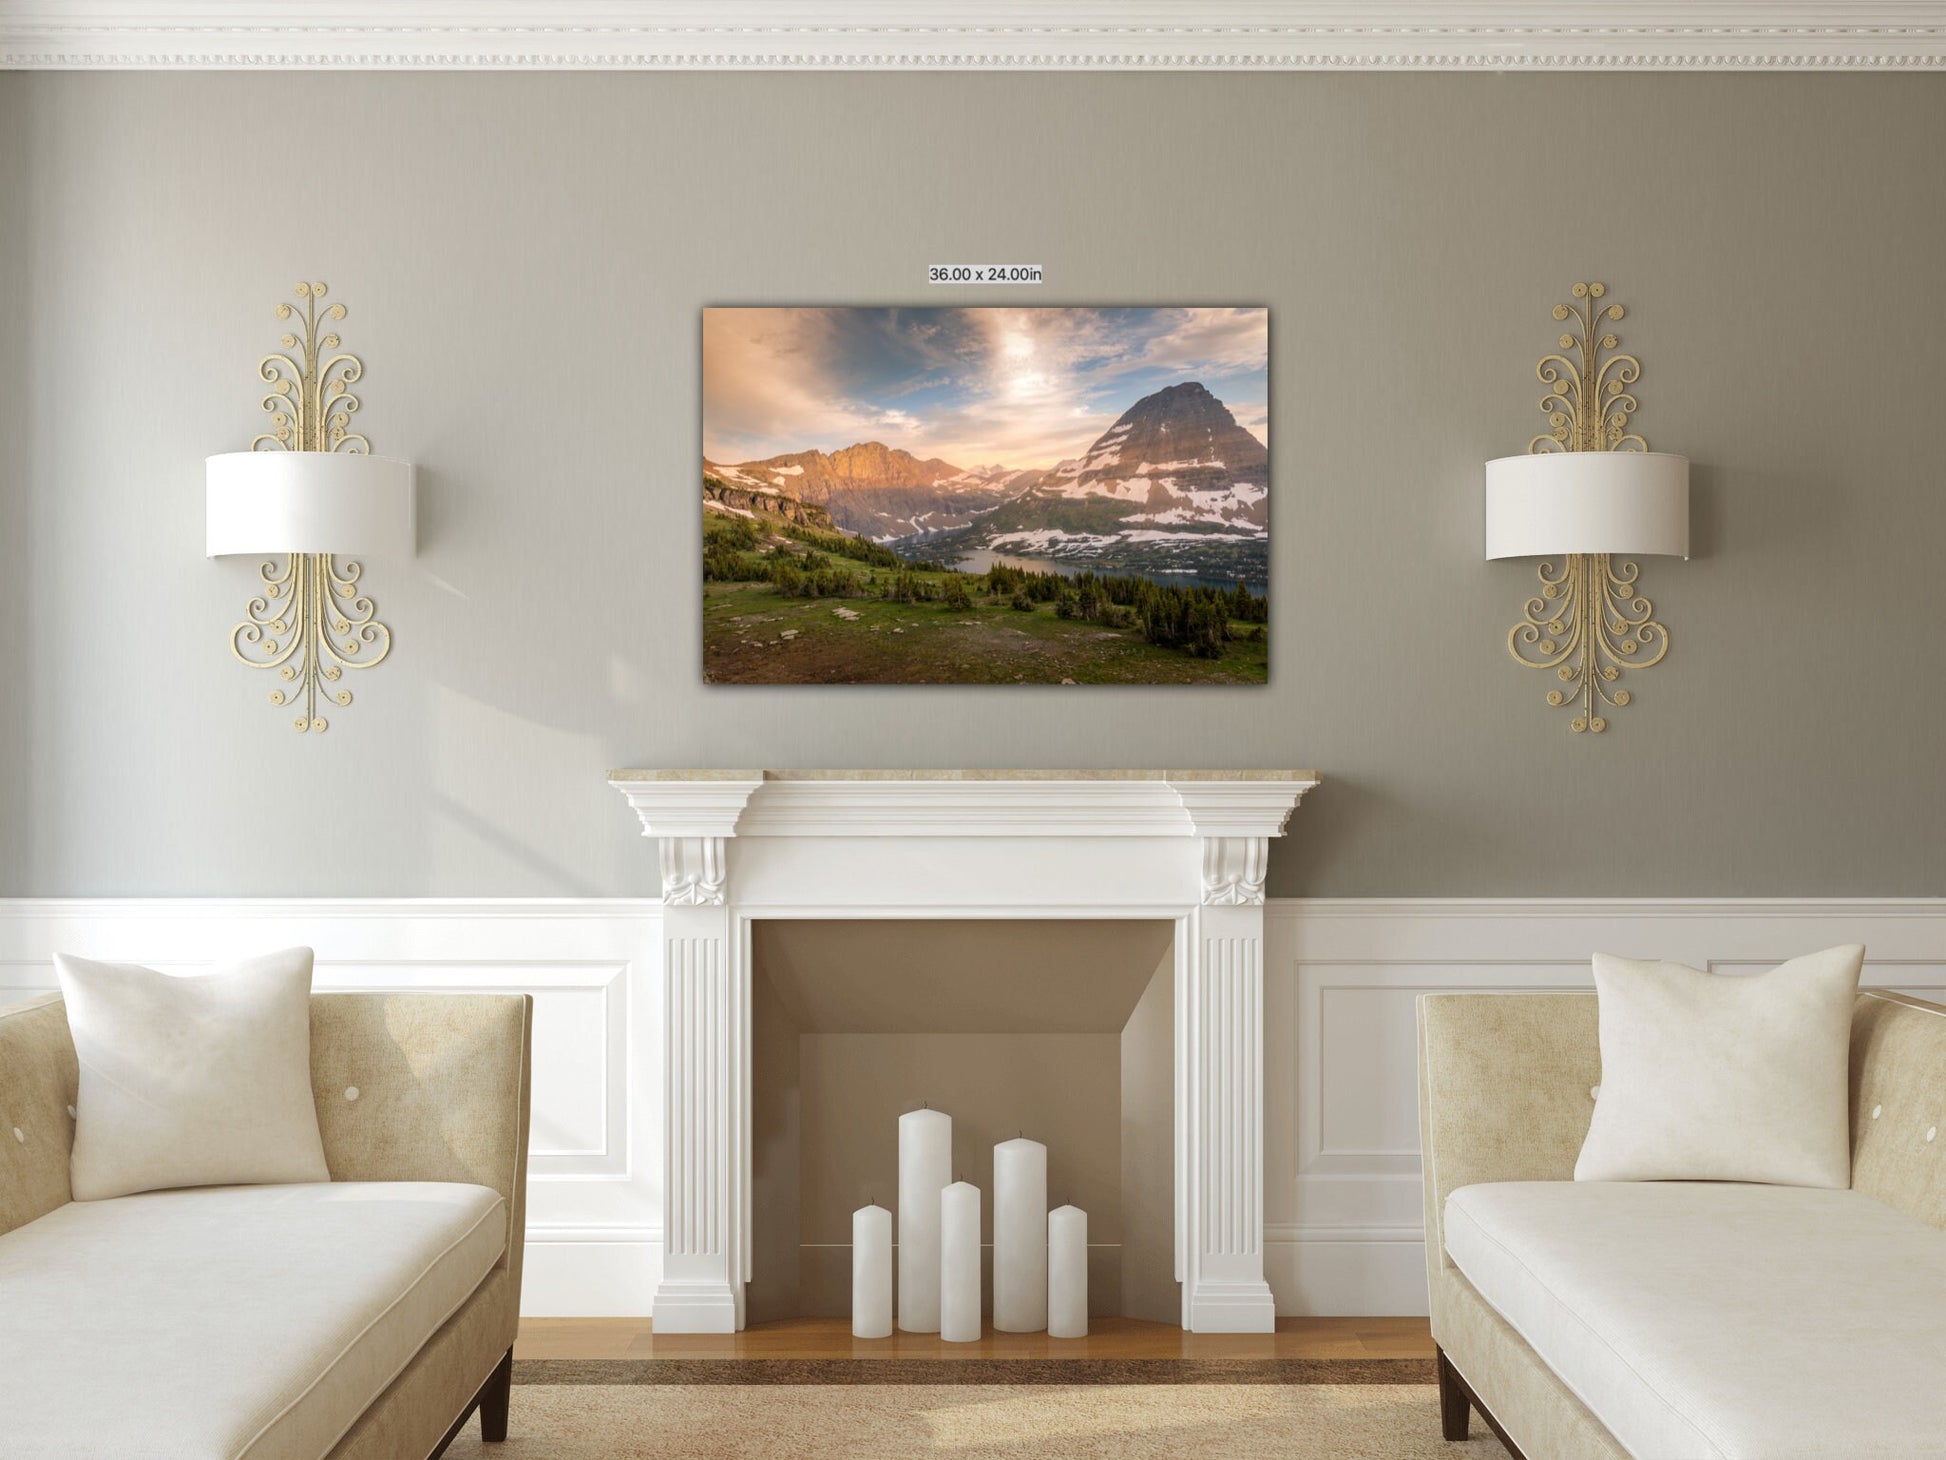 Hidden Lake Sunset, Glacier National Park Montana, Canvas Wall Art Prints-Wall Decor for Home, Living Room, Bedroom, Office and Kitchen